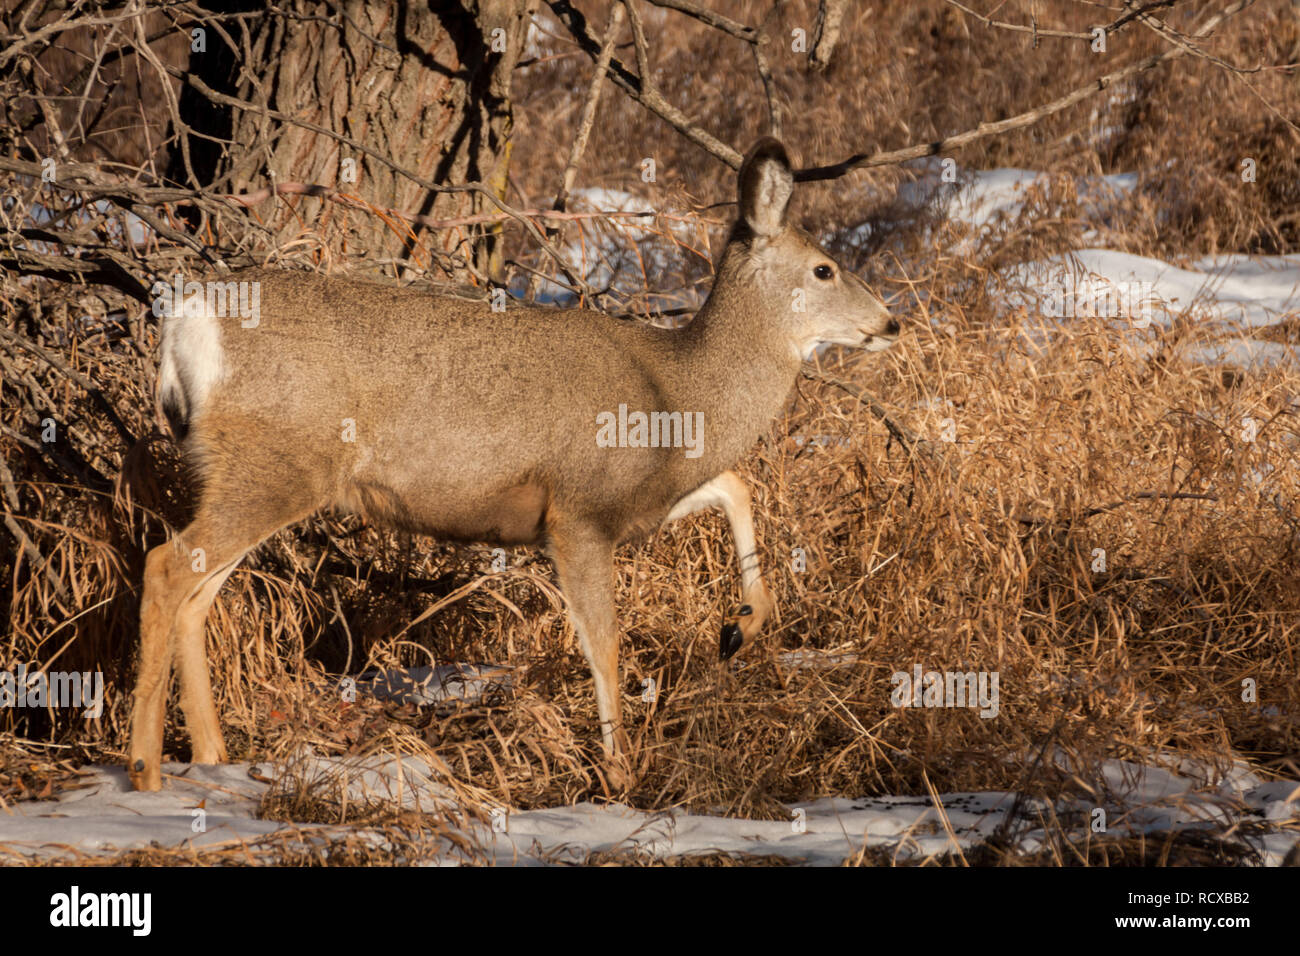 Wild deer (side view), leg and hoof raised, scampers through grass and snow as it forages for food in winter in Alberta, Canada, countryside. Stock Photo